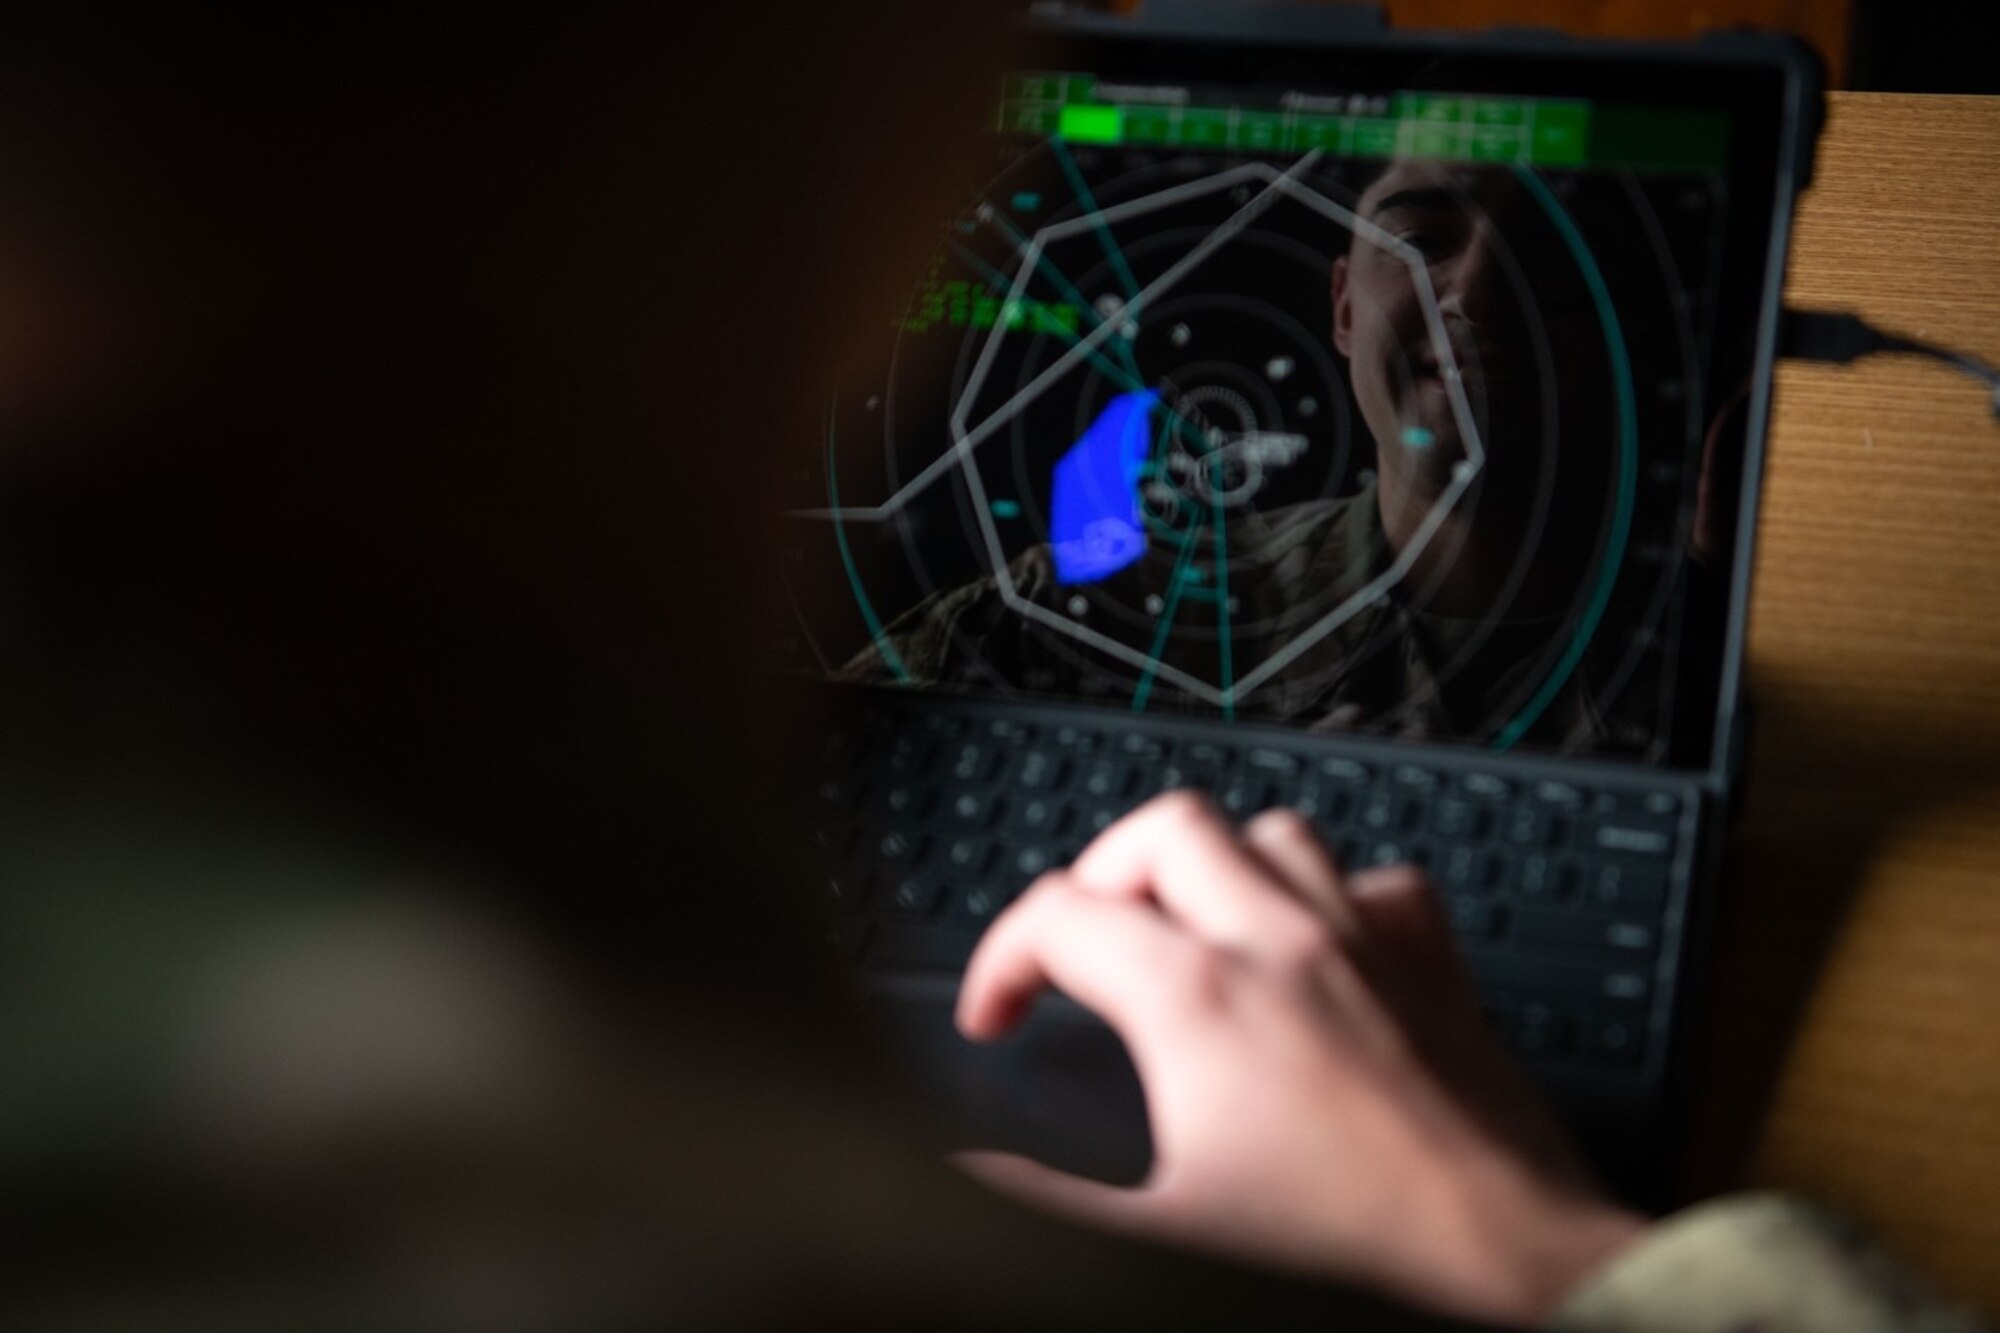 Senior Airman Christopher Daniel, a 28th Operation Support Squadron air traffic control (ATC) trainer, uses the new ATC cloud-based training system on Ellsworth Air Force Base, S.D., April 15, 2021.